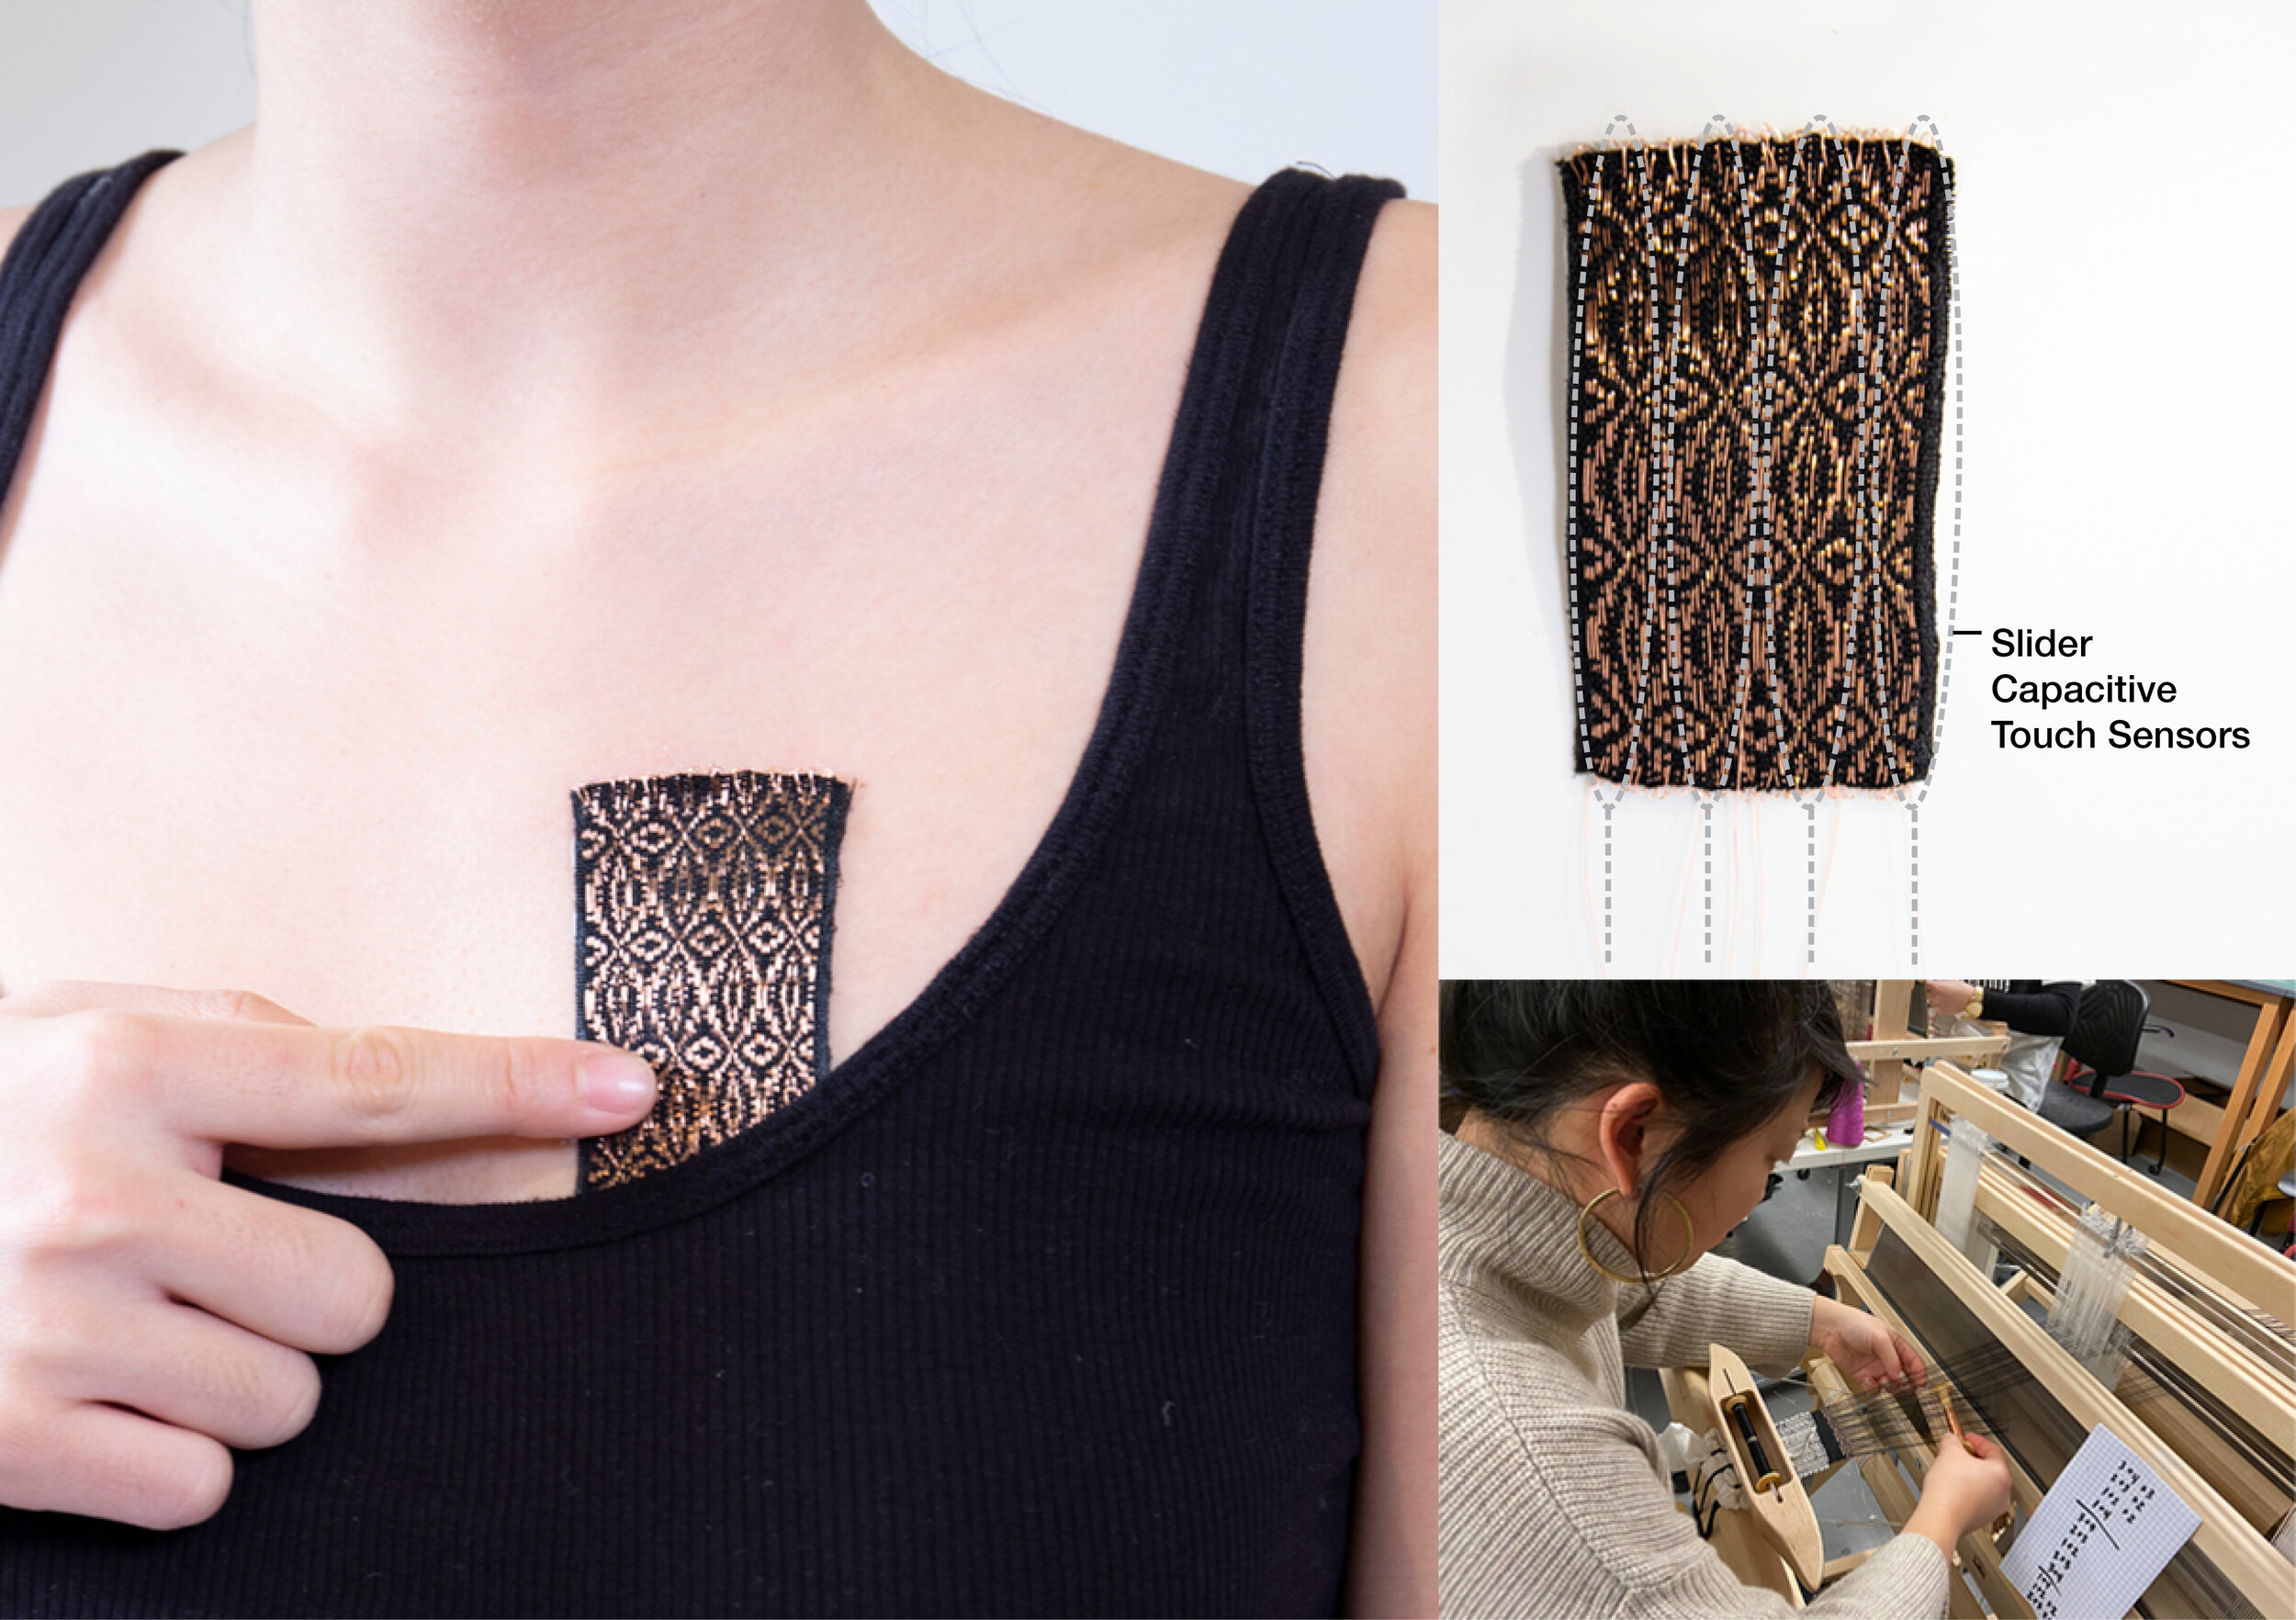  A textile artist’s woven on-skin interface created with the fabrication process developed by the Hybrid Body Lab: A on-skin touch sensor for "touching one’s own heart" woven with overshot patterns. (Image Credit: Hybrid Body Lab) (License: CC BY-NC-